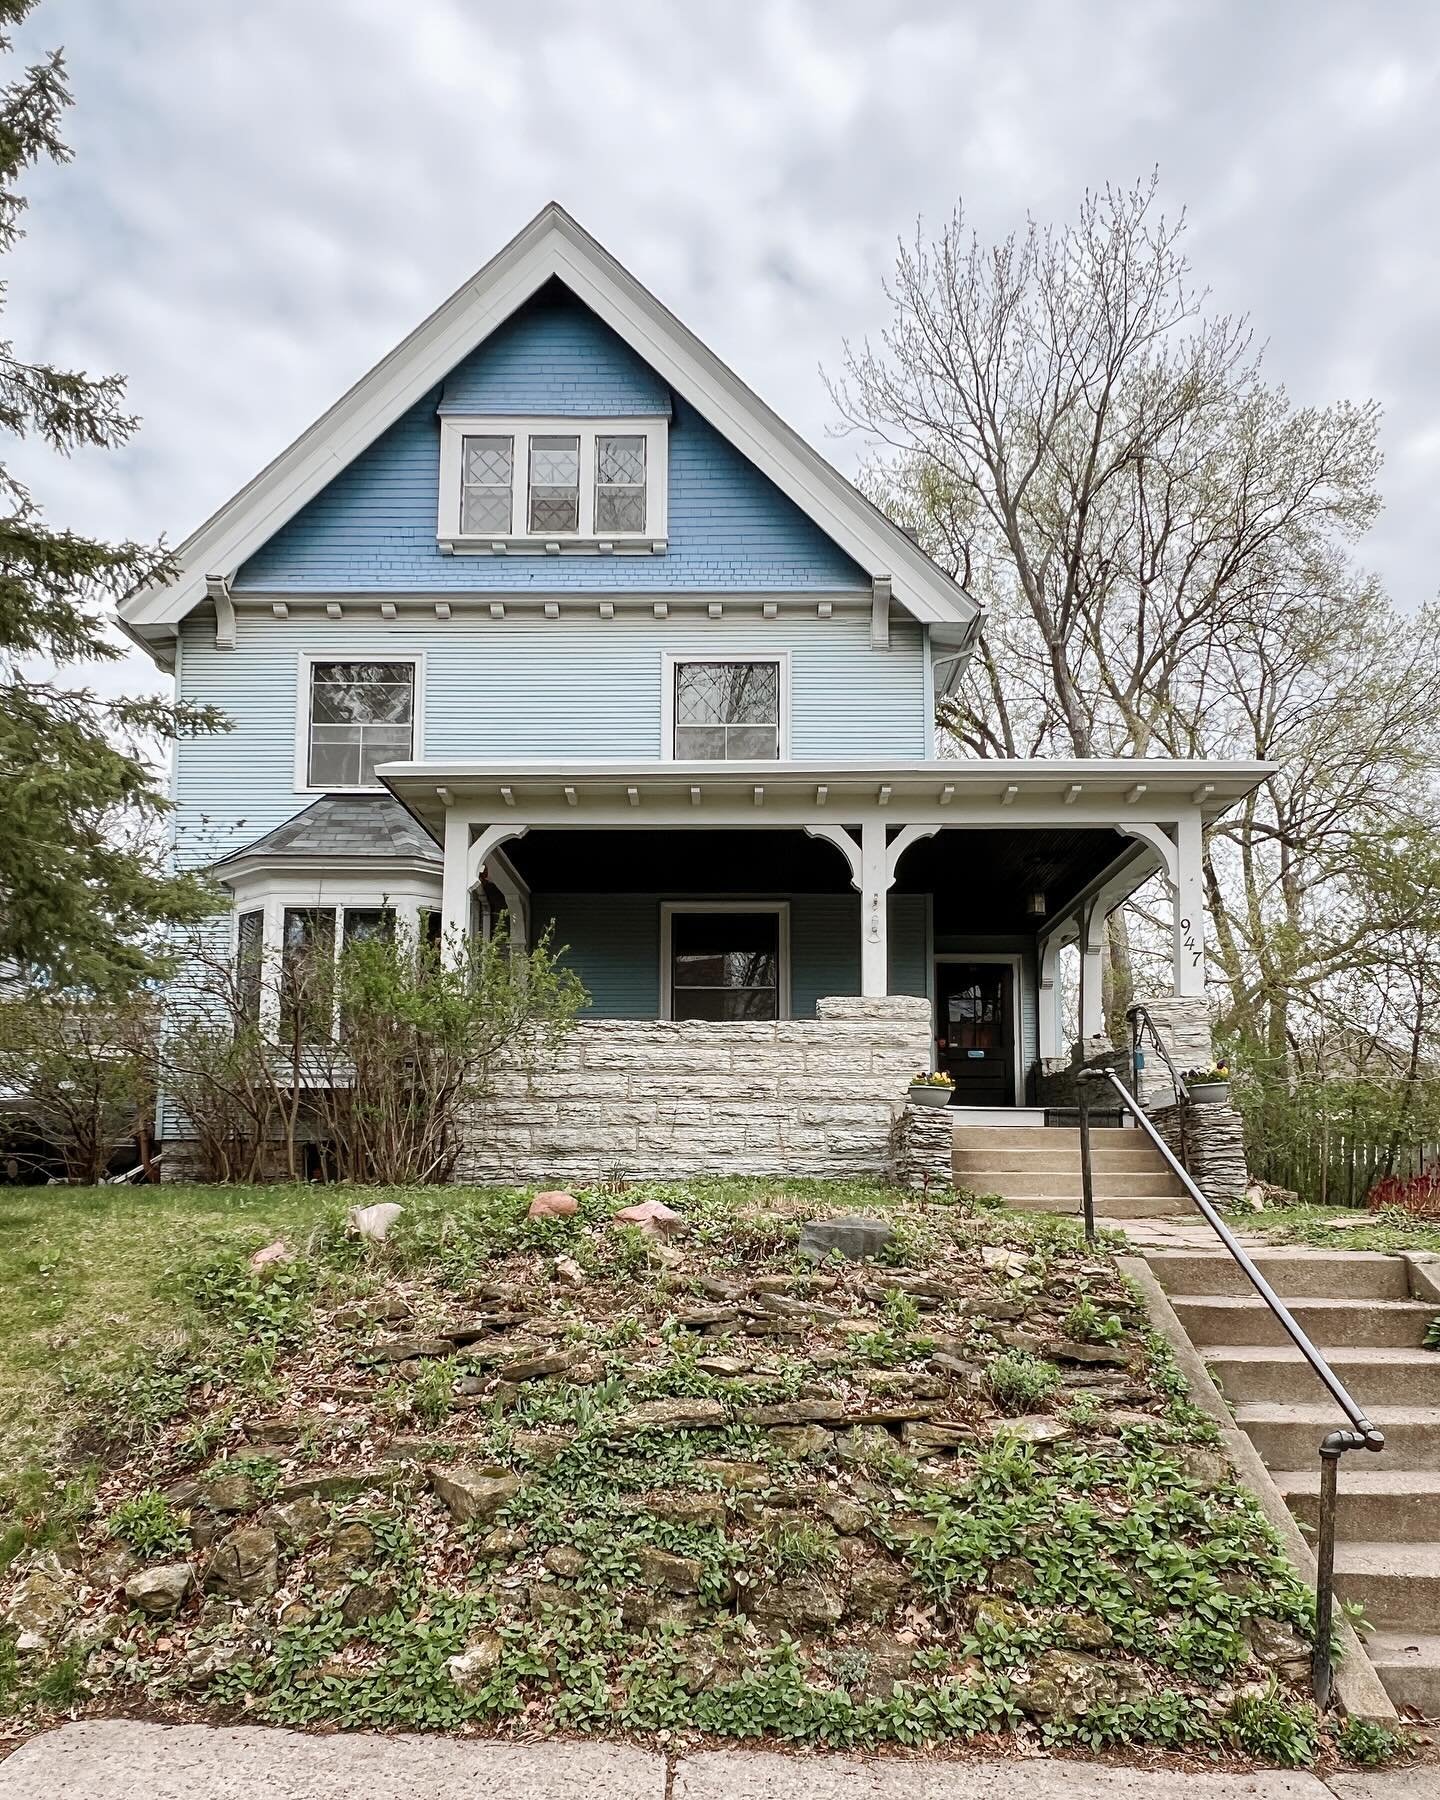 This Victorian home has so much potential to be restored. 3 levels of living, the original charm is still in great shape. Who wants to restore this beauty??

Interested in finding your own home to love? Fill out my &lsquo;buy with me&rsquo; contact f